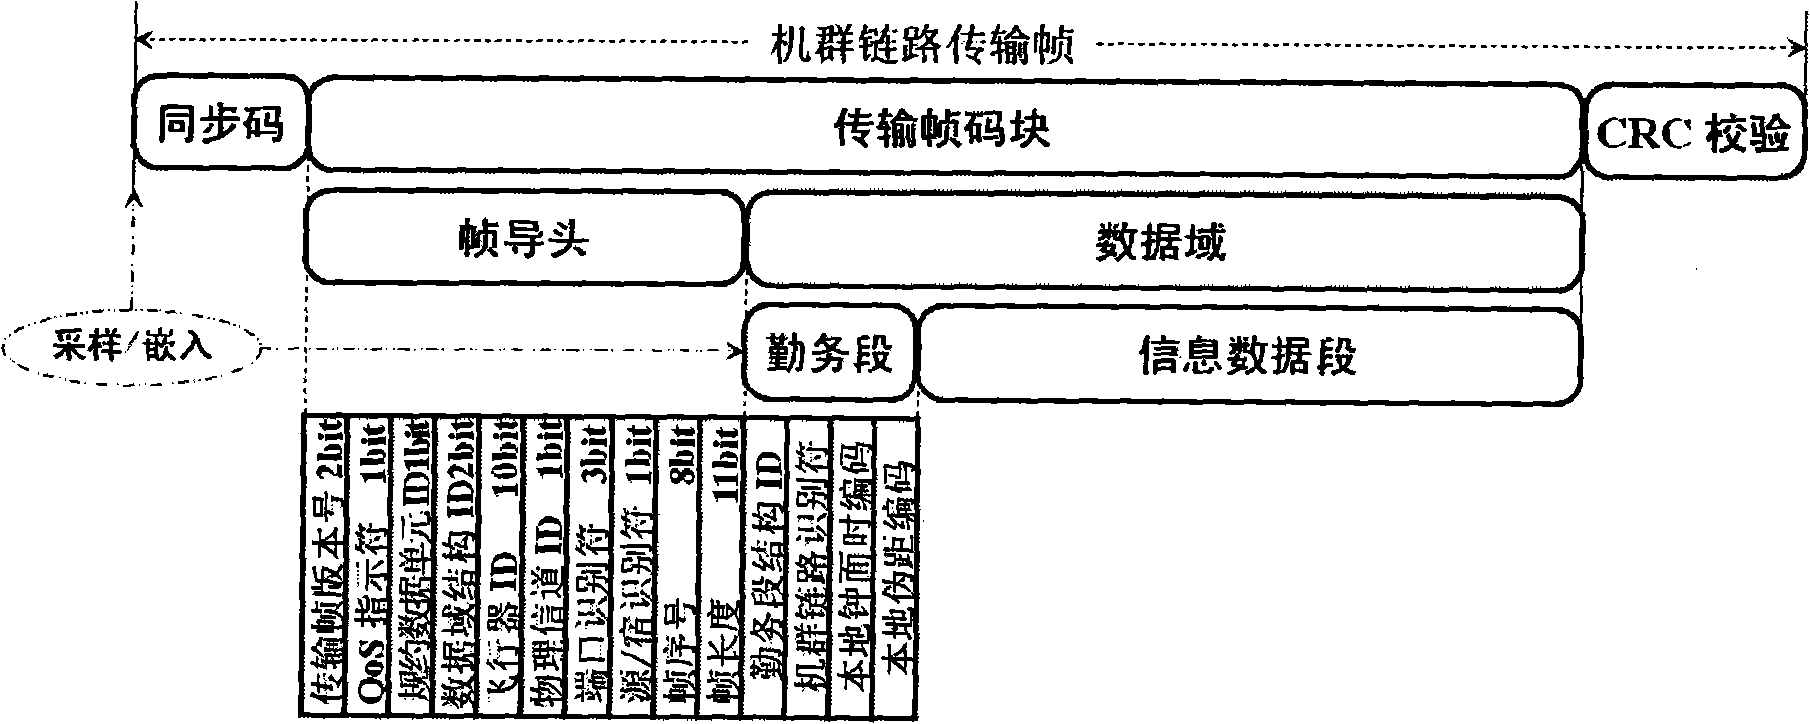 Networking topologic structure of fleet formation and design method for combined multi-address system